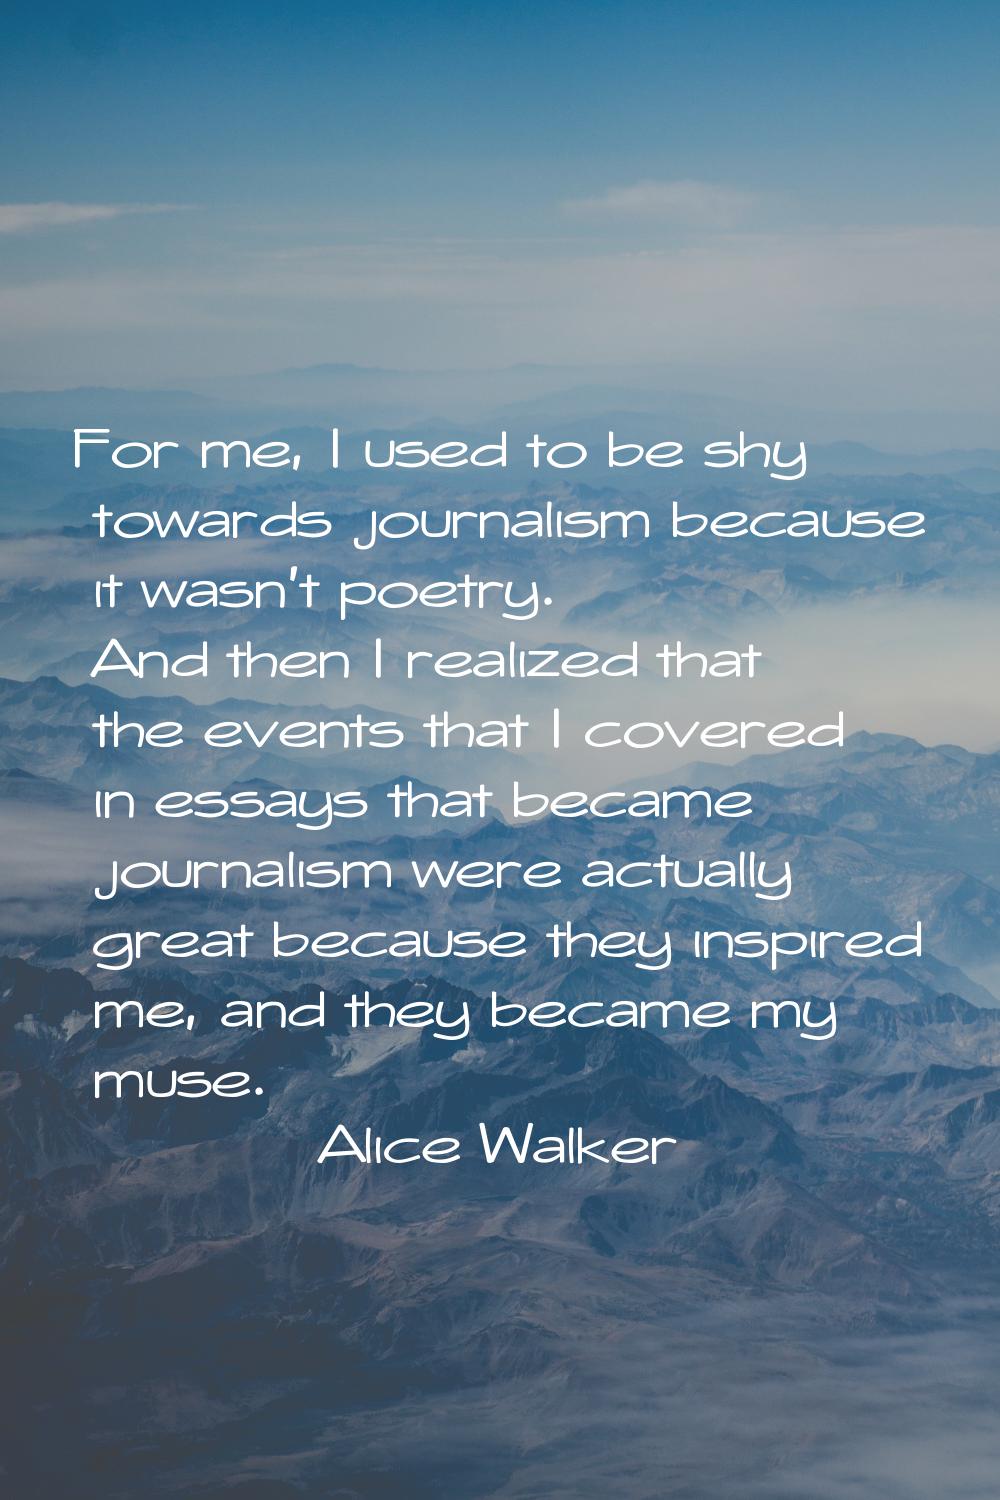 For me, I used to be shy towards journalism because it wasn't poetry. And then I realized that the 